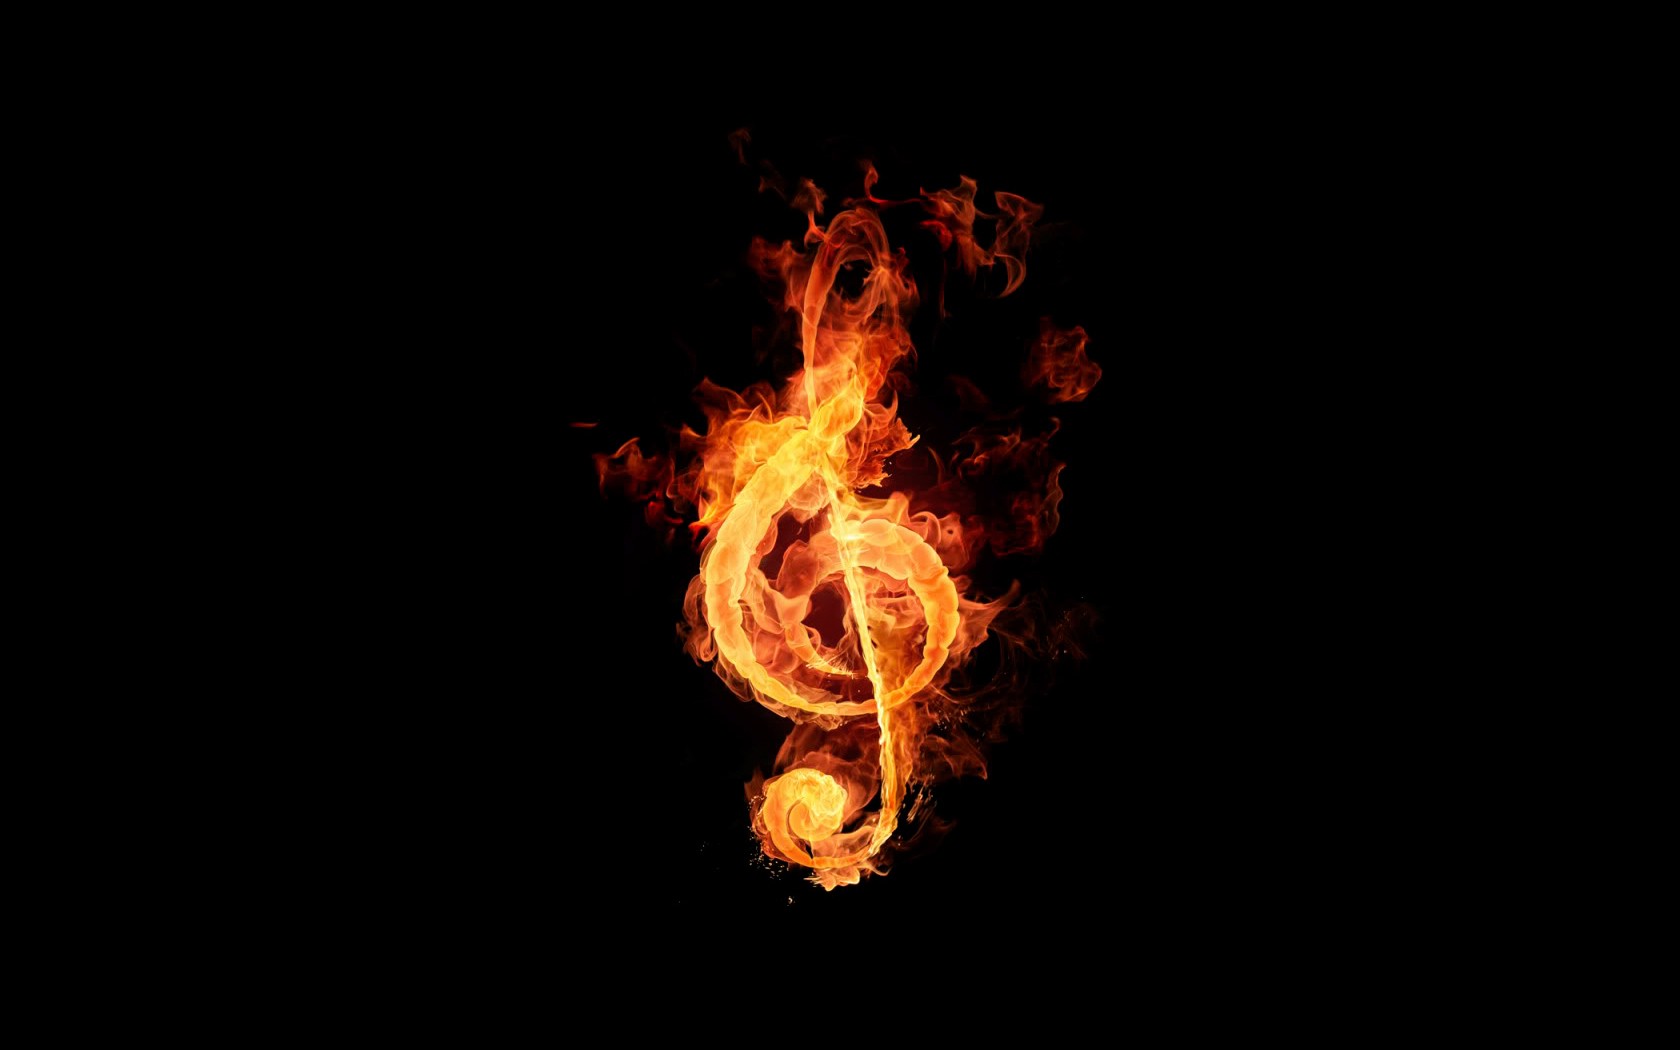 General 1680x1050 music musical notes simple background fire burning Flame Painter minimalism black background digital art